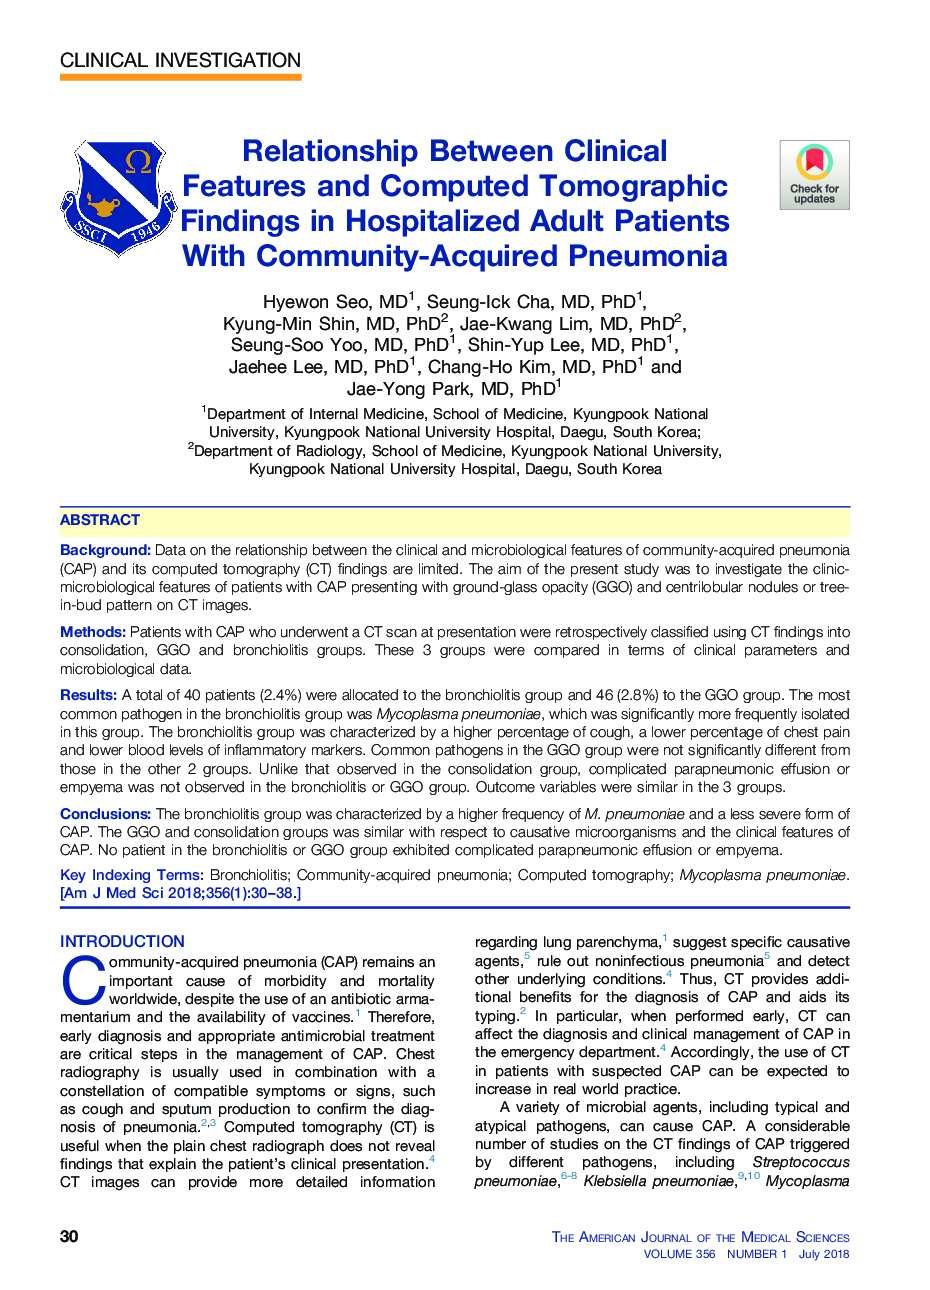 Relationship Between Clinical Features and Computed Tomographic Findings in Hospitalized Adult Patients With Community-Acquired Pneumonia